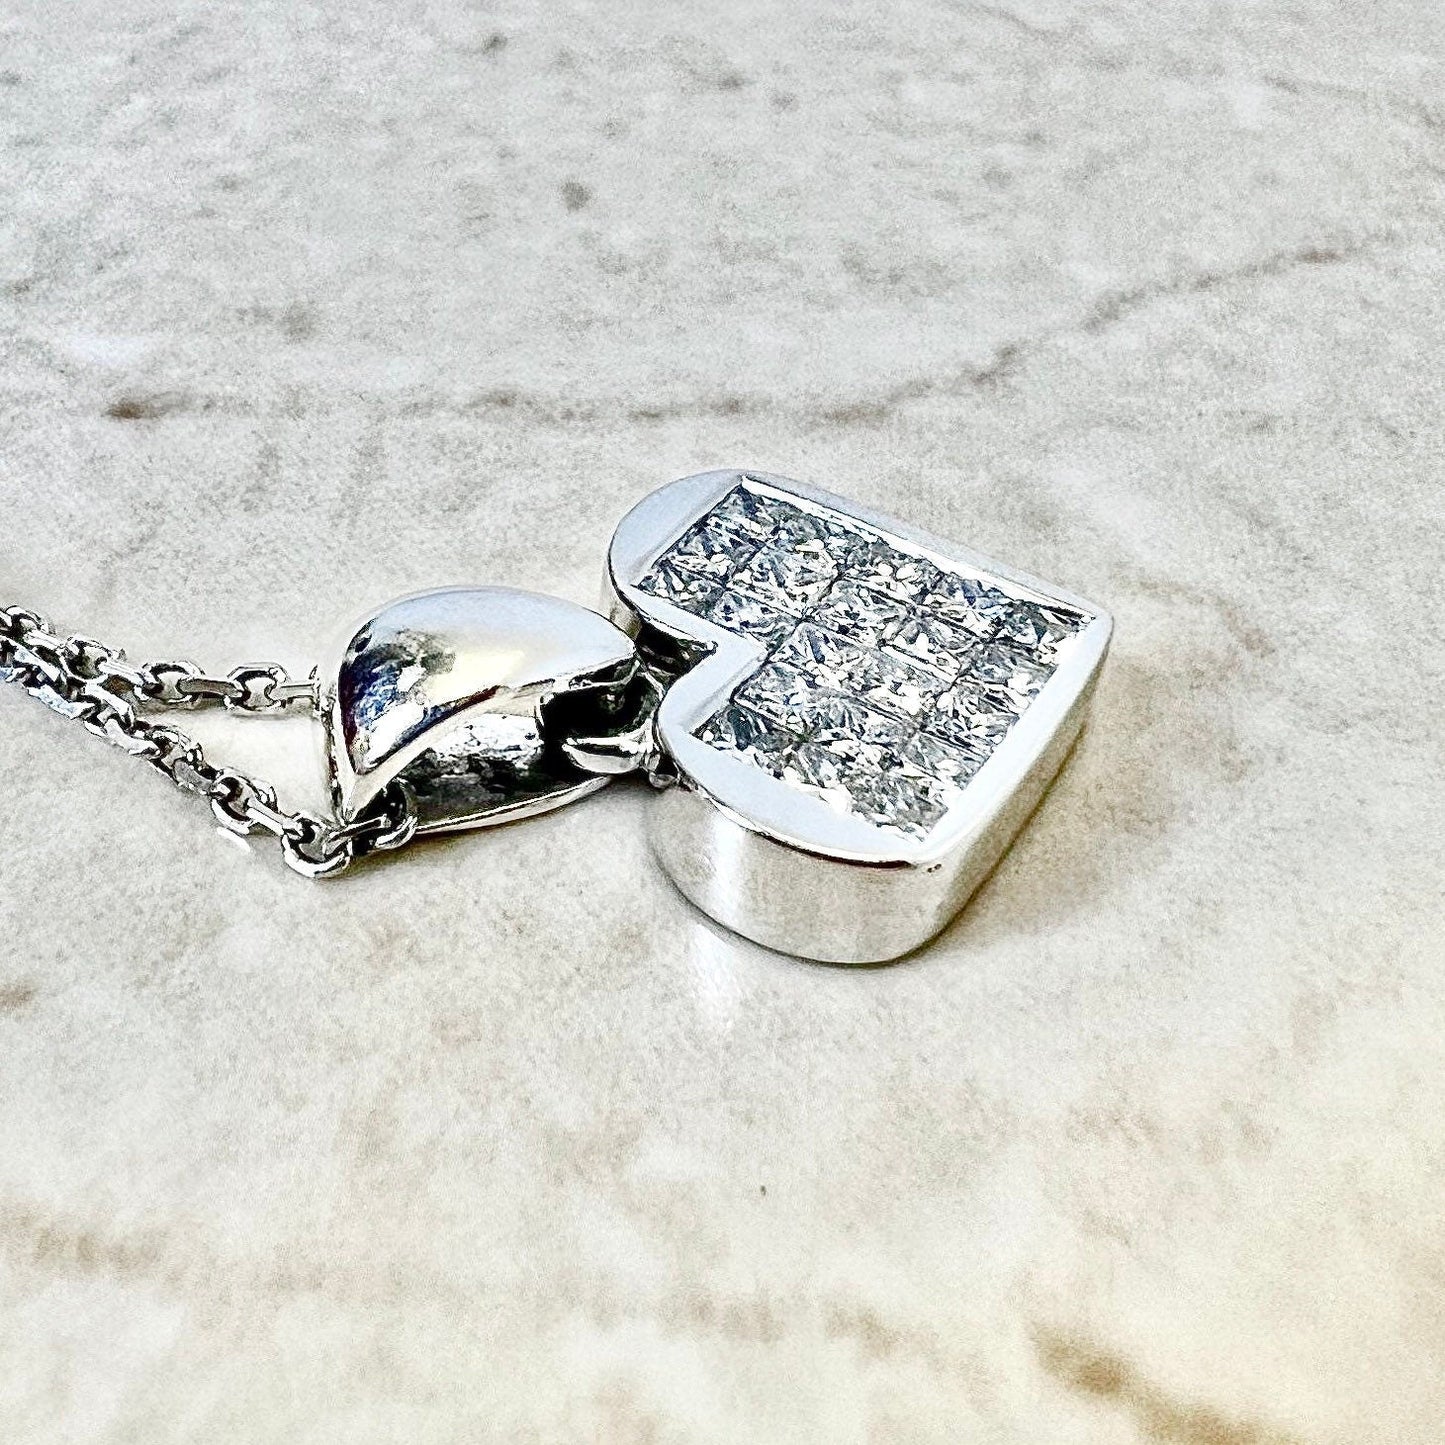 14K Princess Cut Diamond Heart Pendant Necklace - White Gold Diamond Cluster Pendant - Gold Pave Heart Necklace-Valentine’s Day Gift For Her